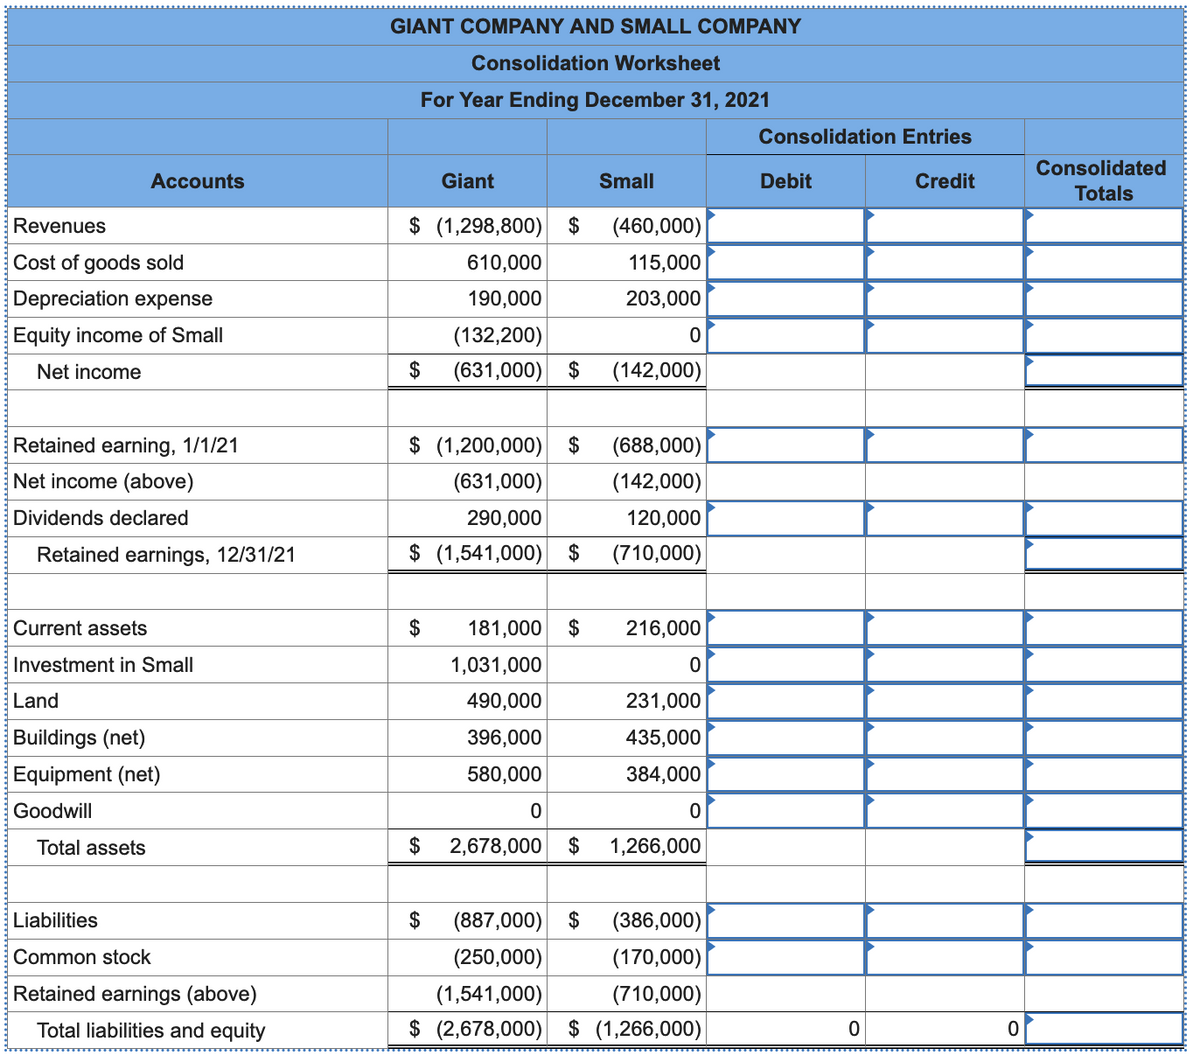 GIANT COMPANY AND SMALL COMPANY
Consolidation Worksheet
For Year Ending December 31, 2021
Consolidation Entries
Consolidated
Accounts
Giant
Small
Debit
Credit
Totals
Revenues
$ (1,298,800) $
(460,000)
Cost of goods sold
610,000
115,000
Depreciation expense
190,000
203,000
Equity income of Small
(132,200)
Net income
$
(631,000) $
(142,000)
Retained earning, 1/1/21
$ (1,200,000) $
(688,000)
Net income (above)
(631,000)
(142,000)
Dividends declared
290,000
120,000
Retained earnings, 12/31/21
$ (1,541,000)
2$
(710,000)
Current assets
$
181,000 $
216,000
Investment in Small
1,031,000
Land
490,000
231,000
Buildings (net)
Equipment (net)
396,000
435,000
580,000
384,000
Goodwill
Total assets
$
2,678,000
$
1,266,000
Liabilities
$
(887,000) $
(386,000)
Common stock
(250,000)
(170,000)
Retained earnings (above)
(1,541,000)
(710,000)
Total liabilities and equity
$ (2,678,000)
$ (1,266,000)
